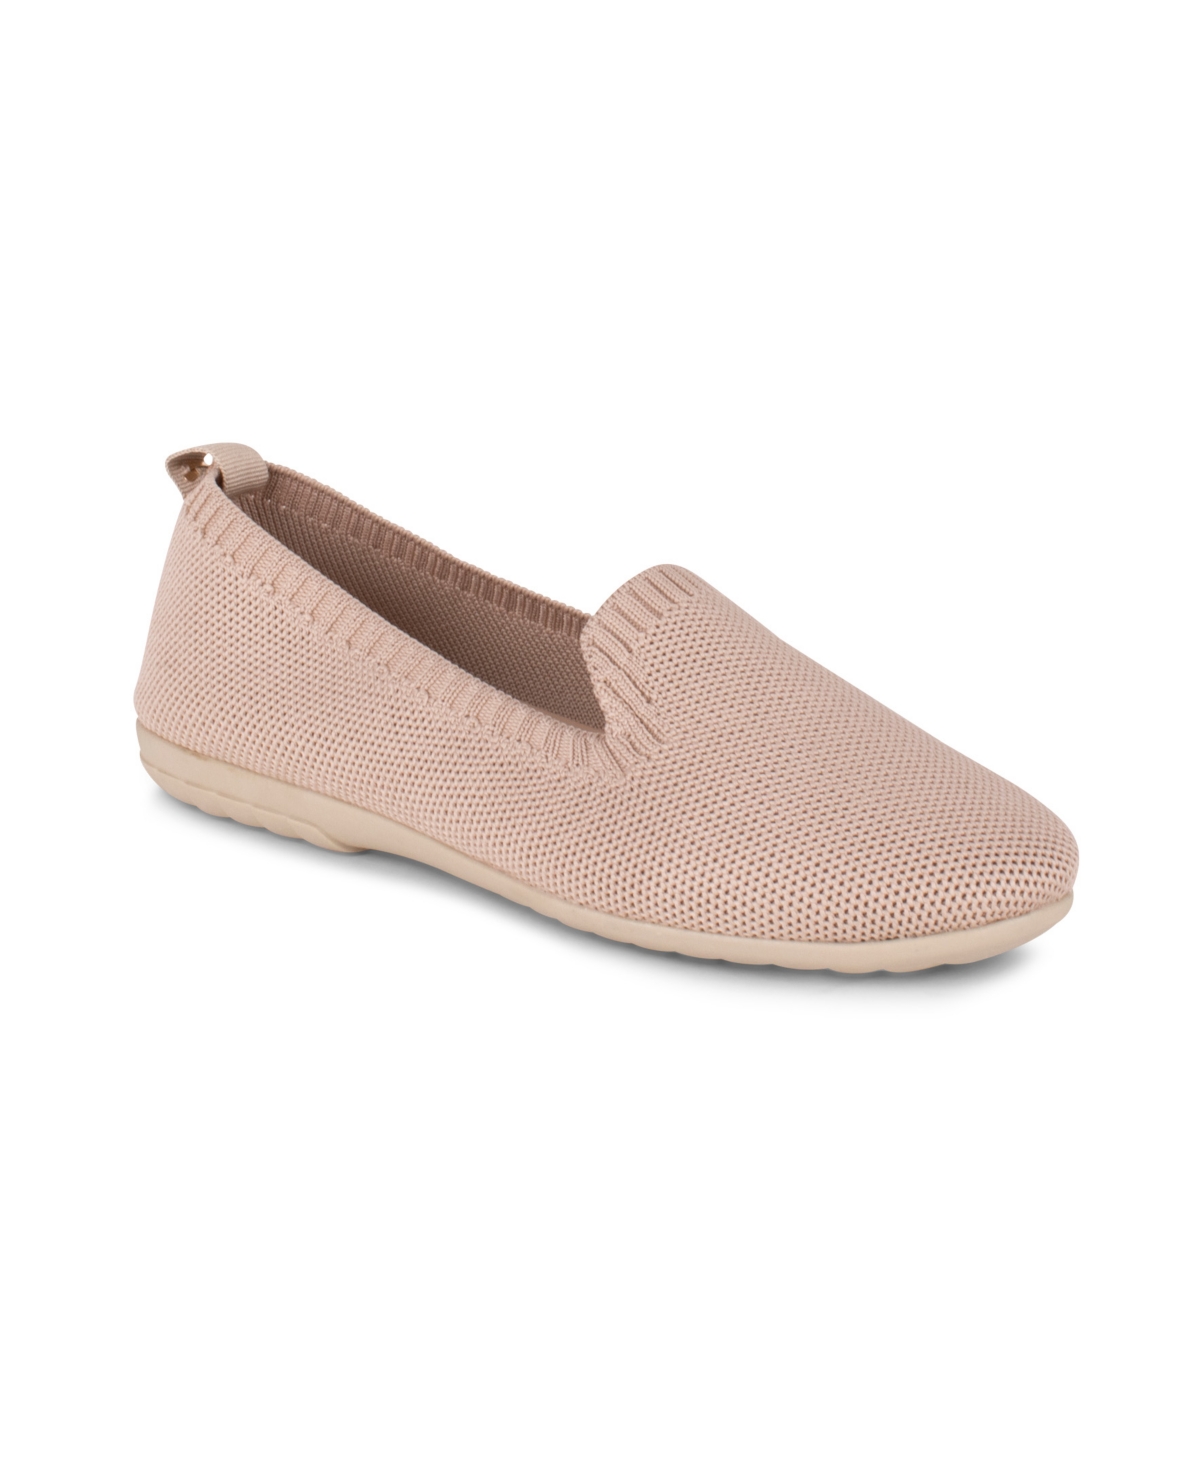 Women's Carrie Knit Slip On Loafer - Natural